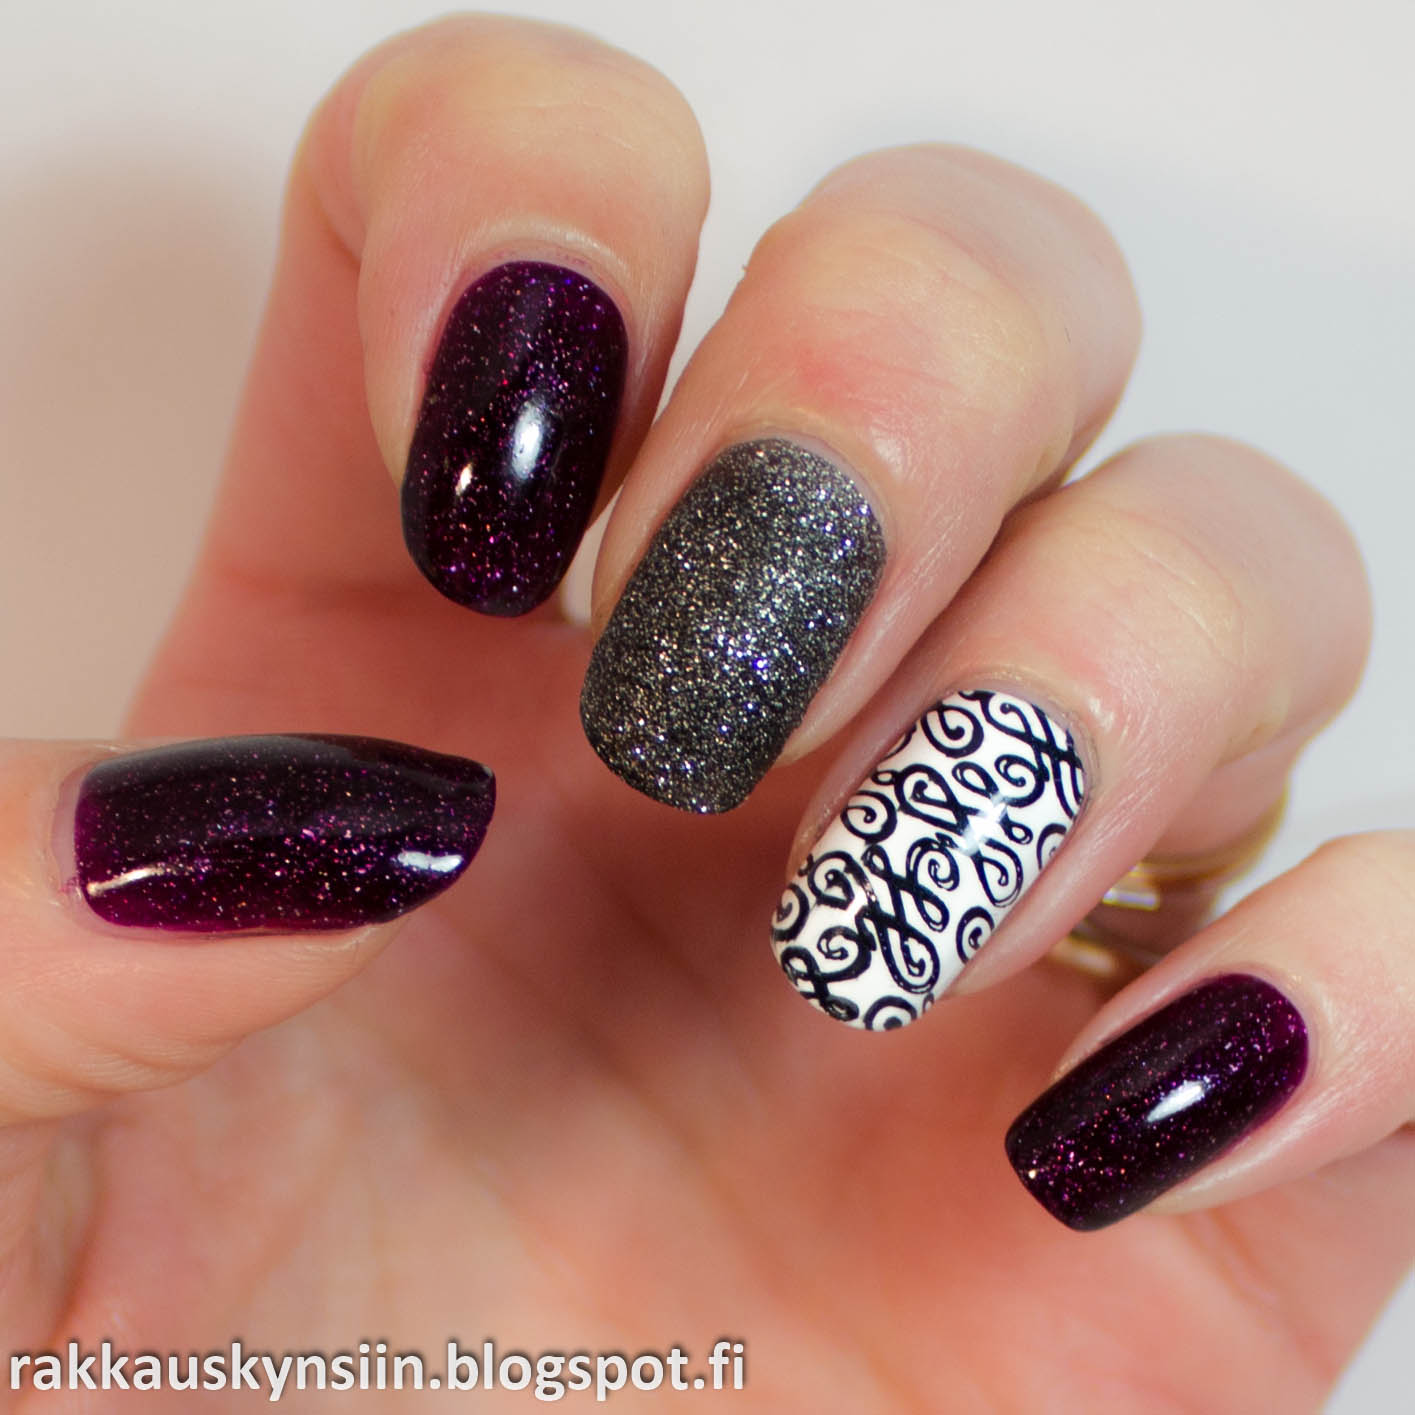 hand with a manicure with purple and white patterns